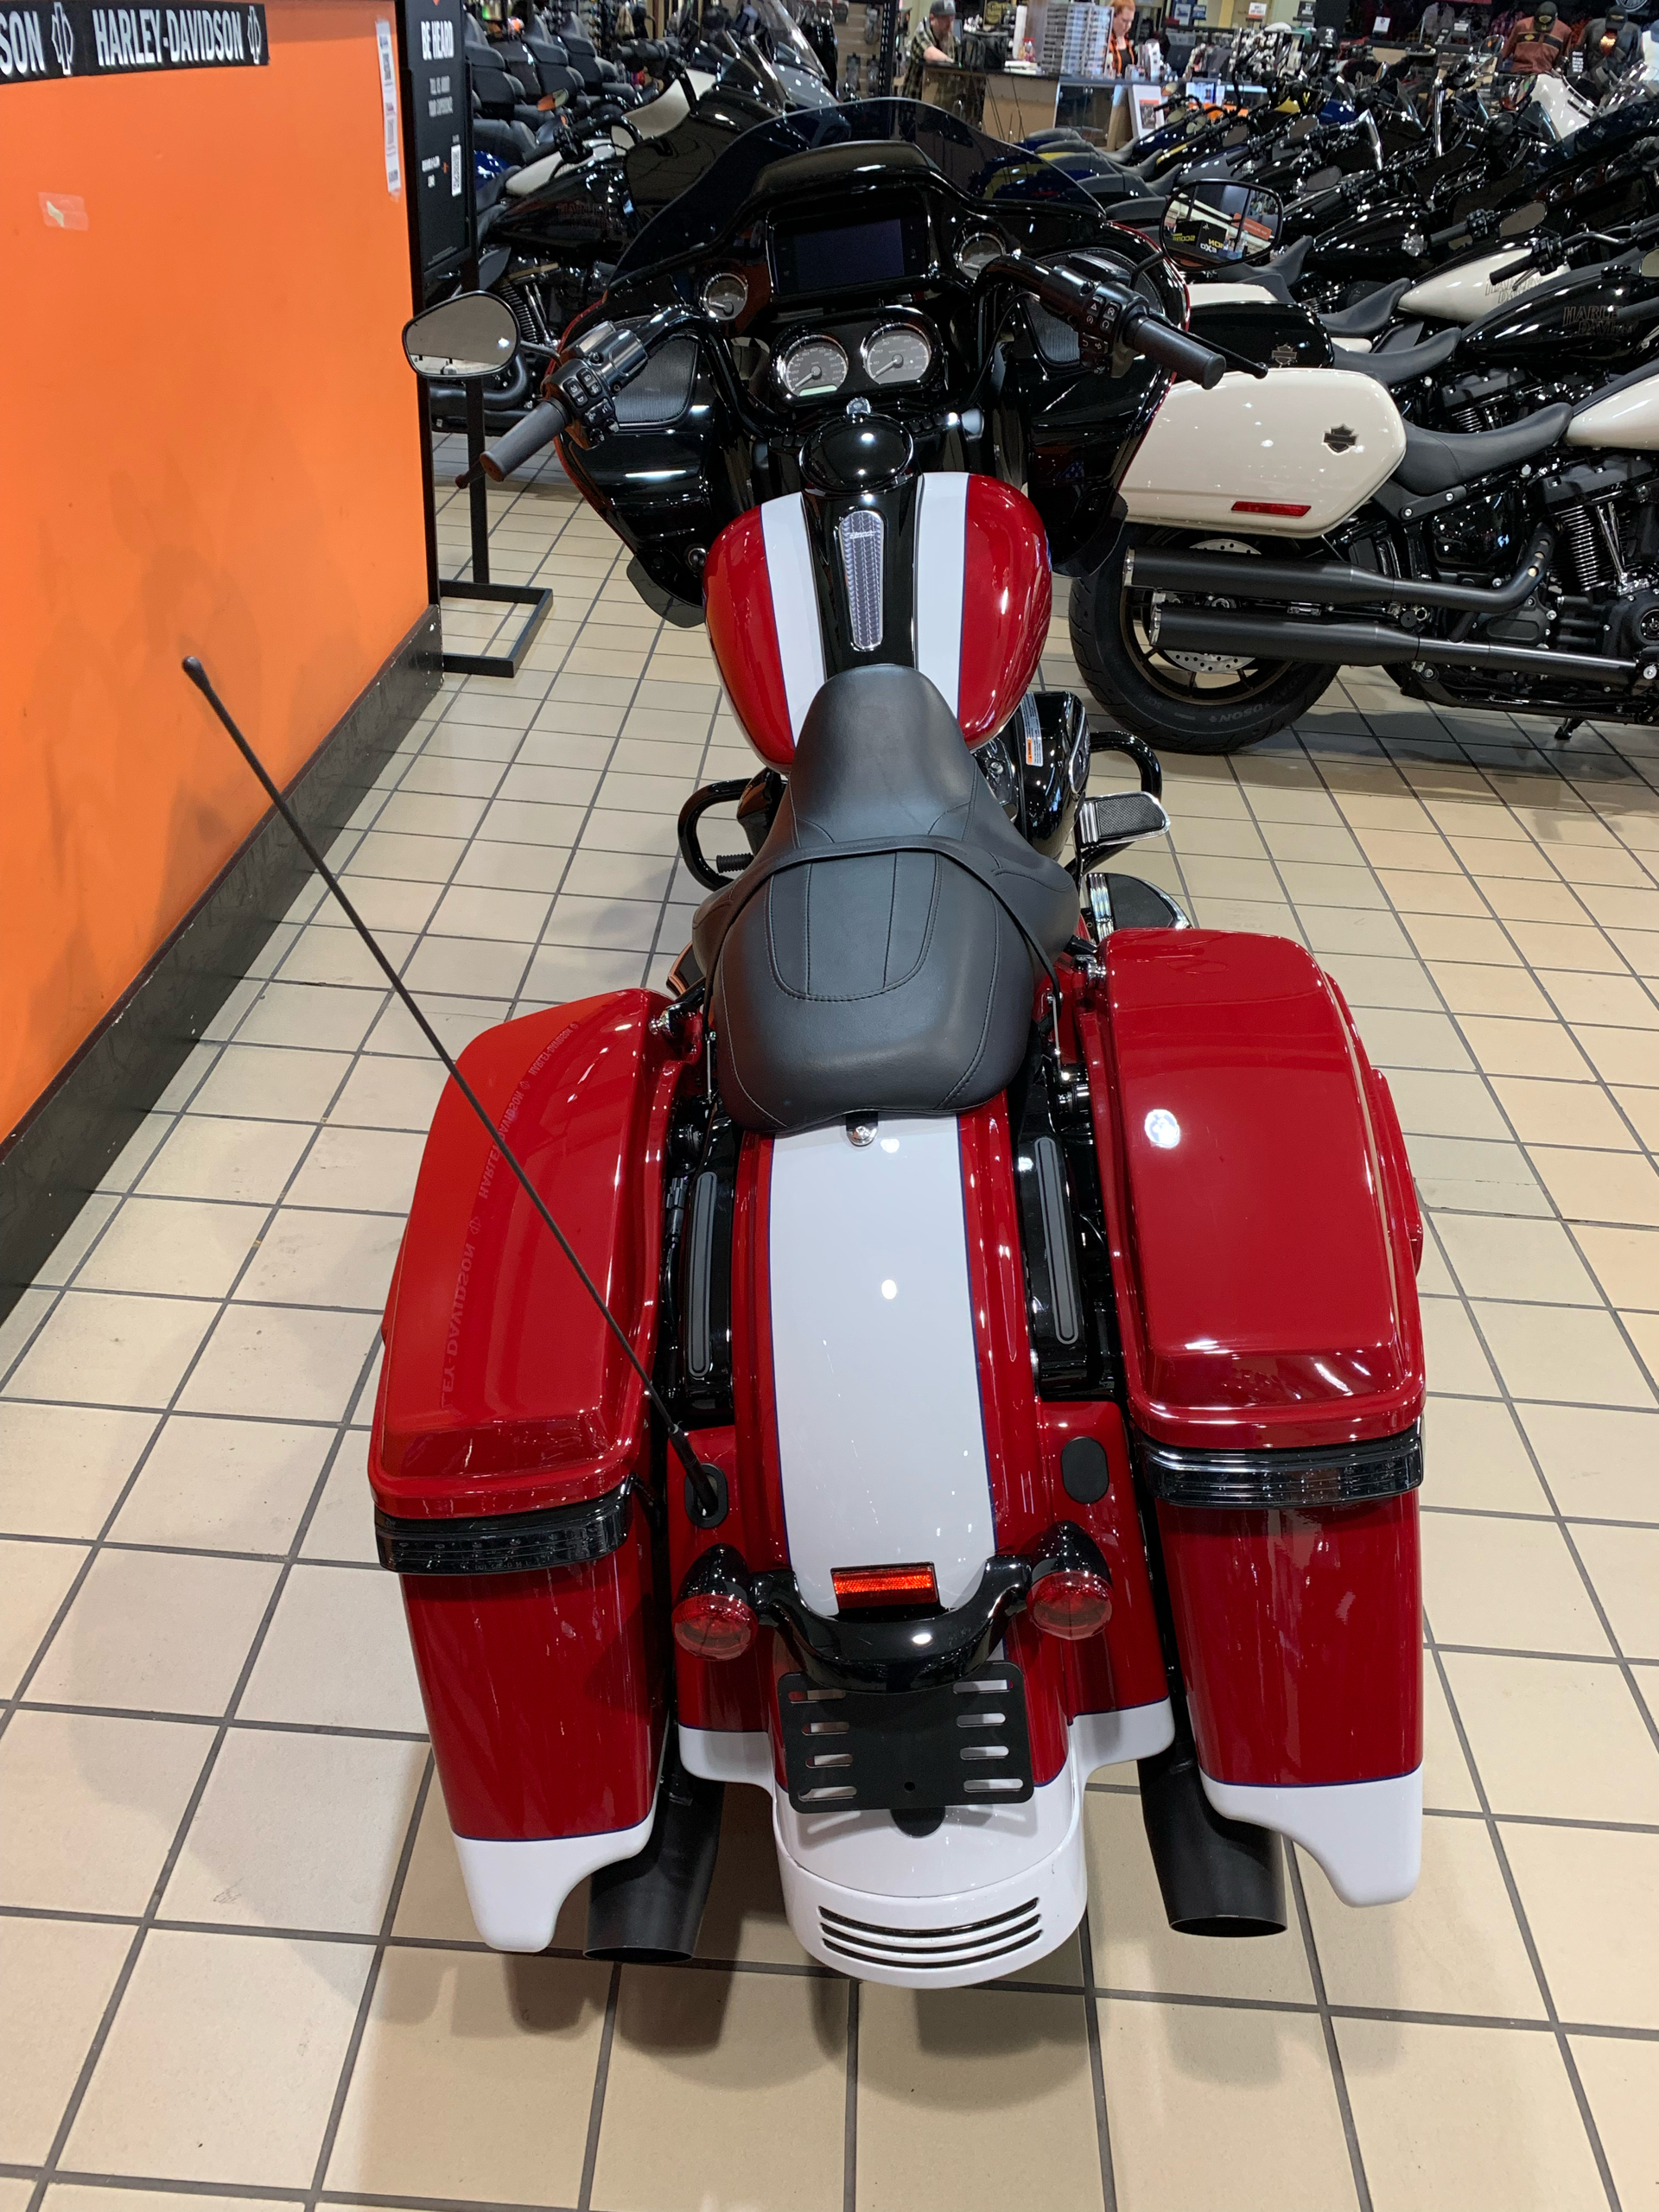 2020 Harley-Davidson ROAD GLIDE SPECIAL in Dumfries, Virginia - Photo 4